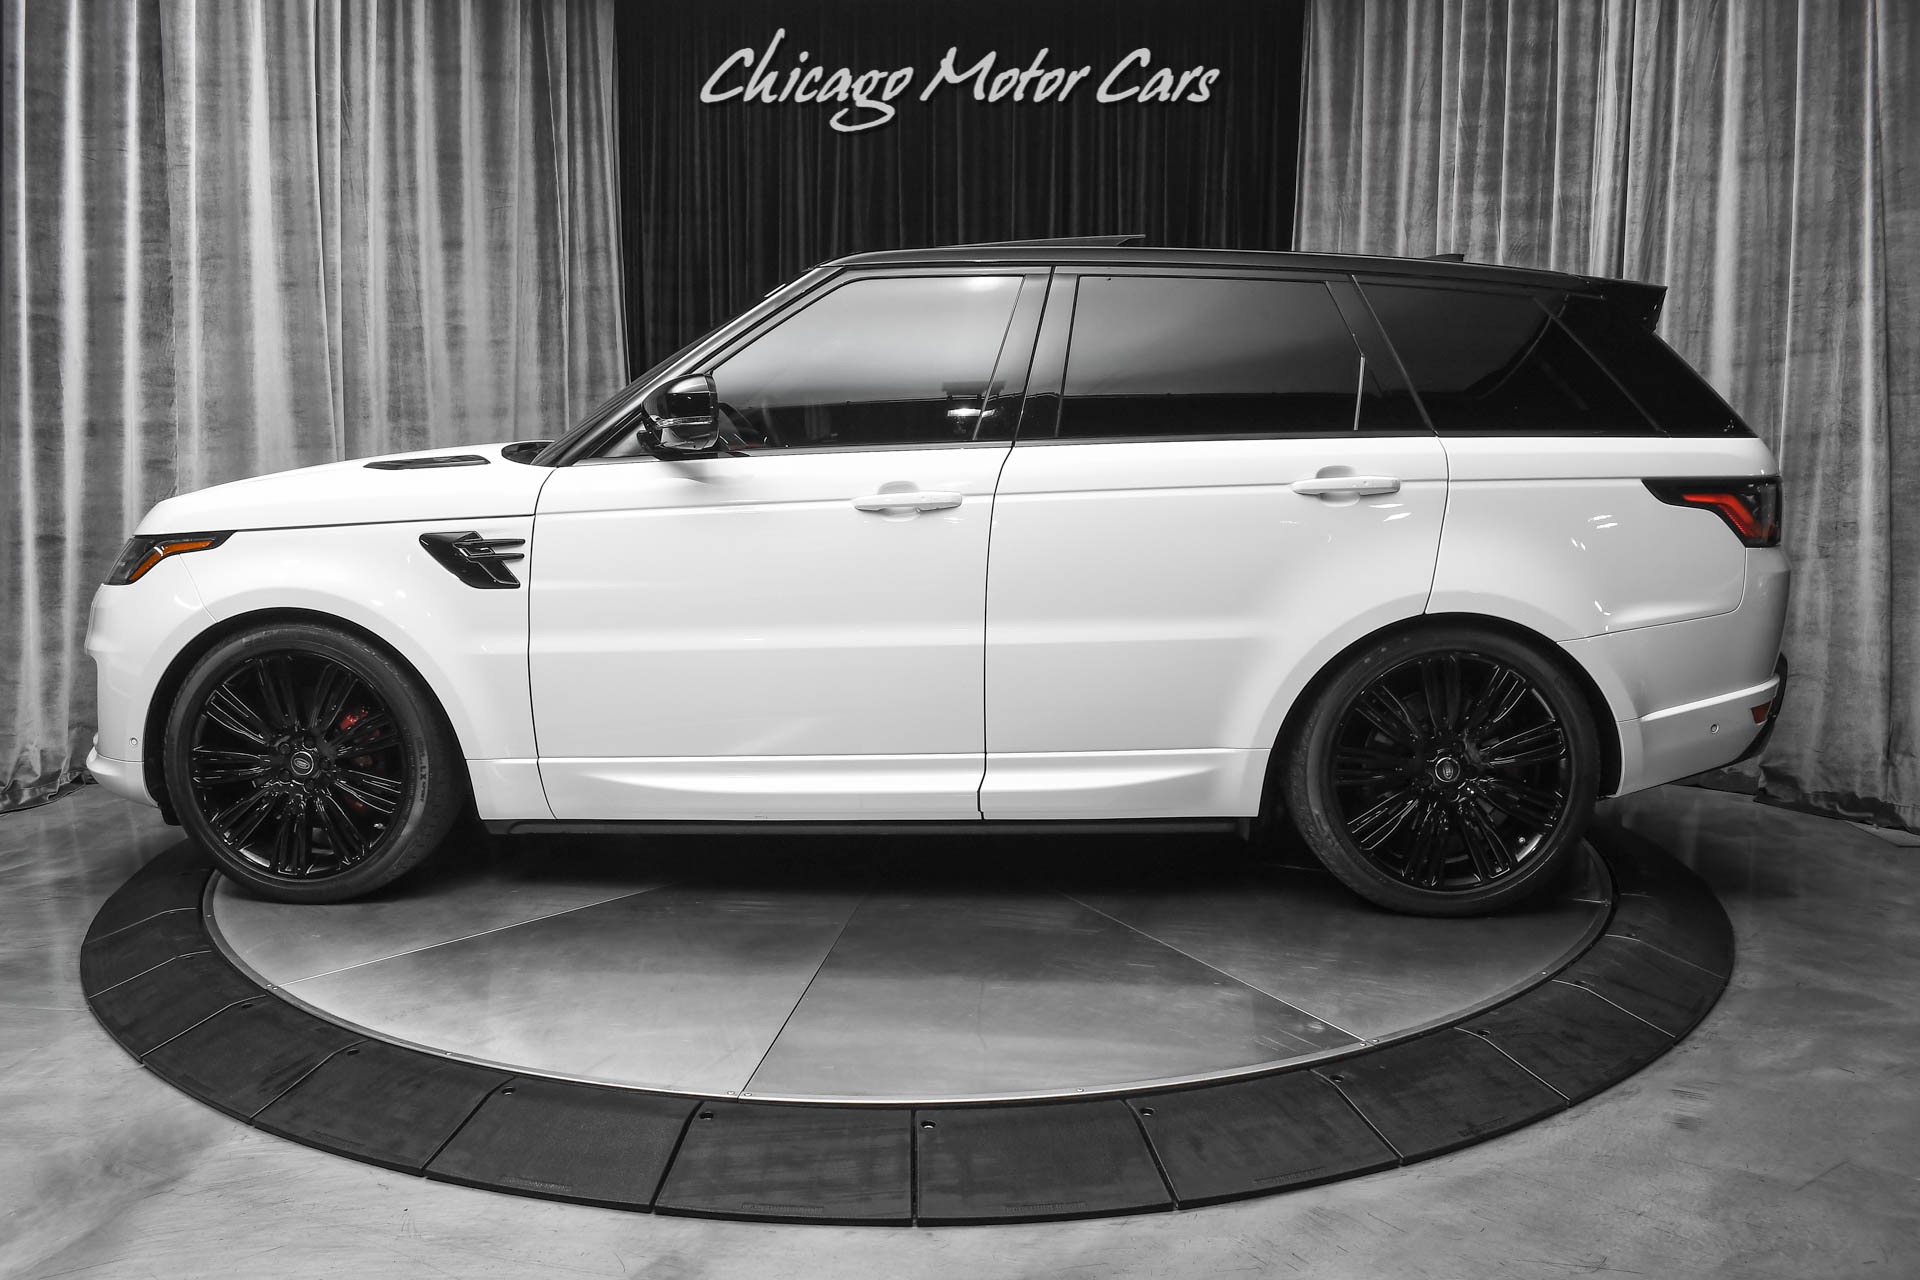 Used 2018 Land Rover Range Rover Sport Supercharged Dynamic Vision Assist  Pack! Rear Seat Entertainment Screens! For Sale (Special Pricing) | Chicago  Motor Cars Stock #18670